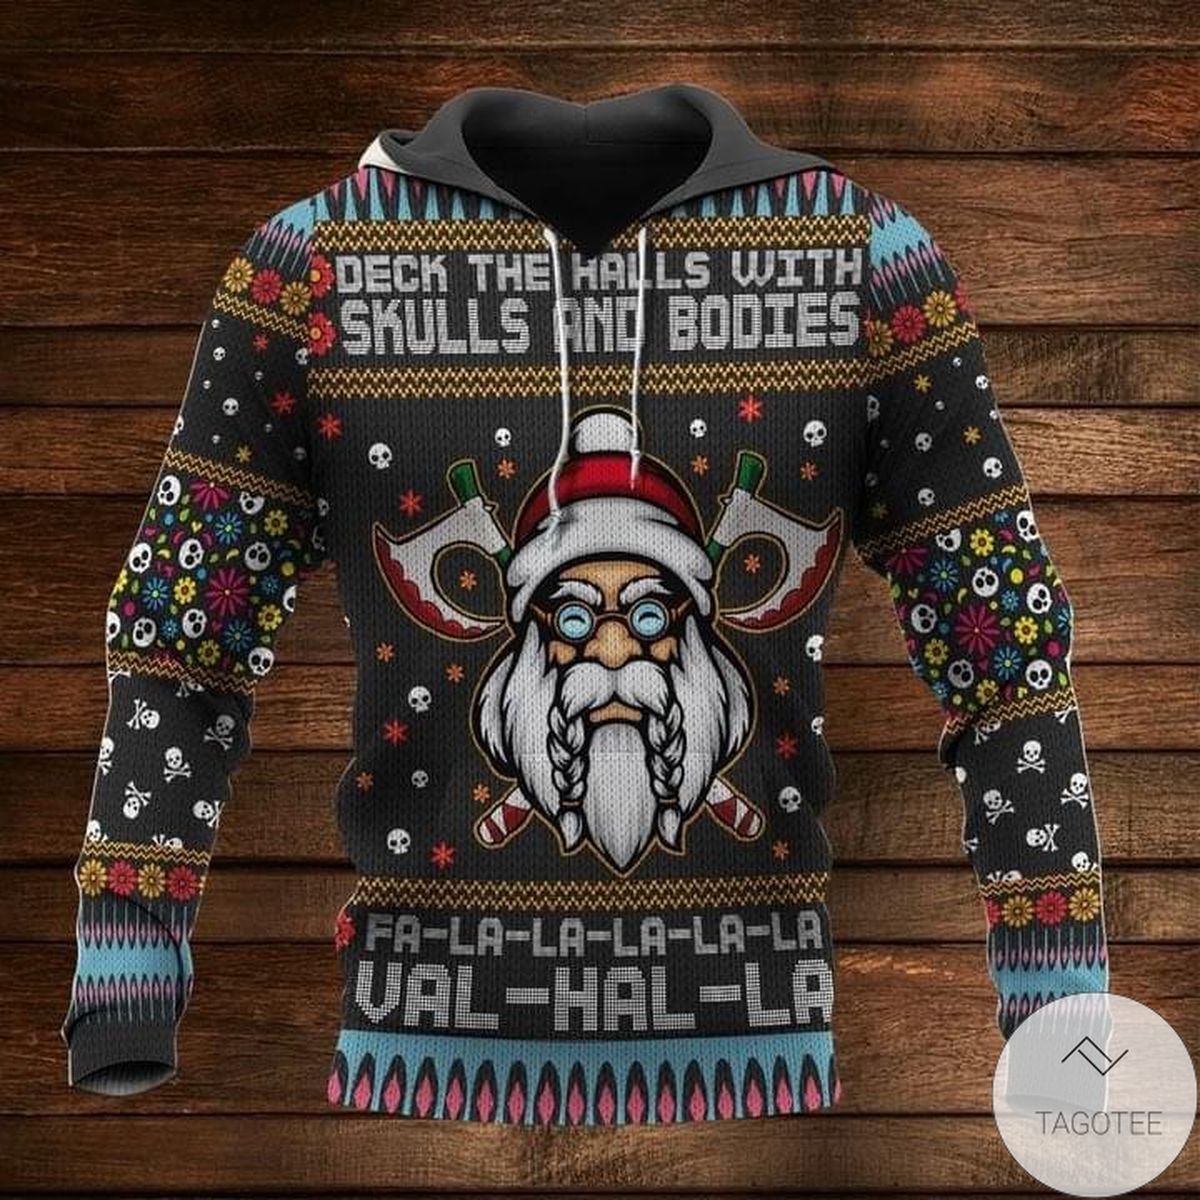 Deck The Halls With Skulls And Bodies Hoodie